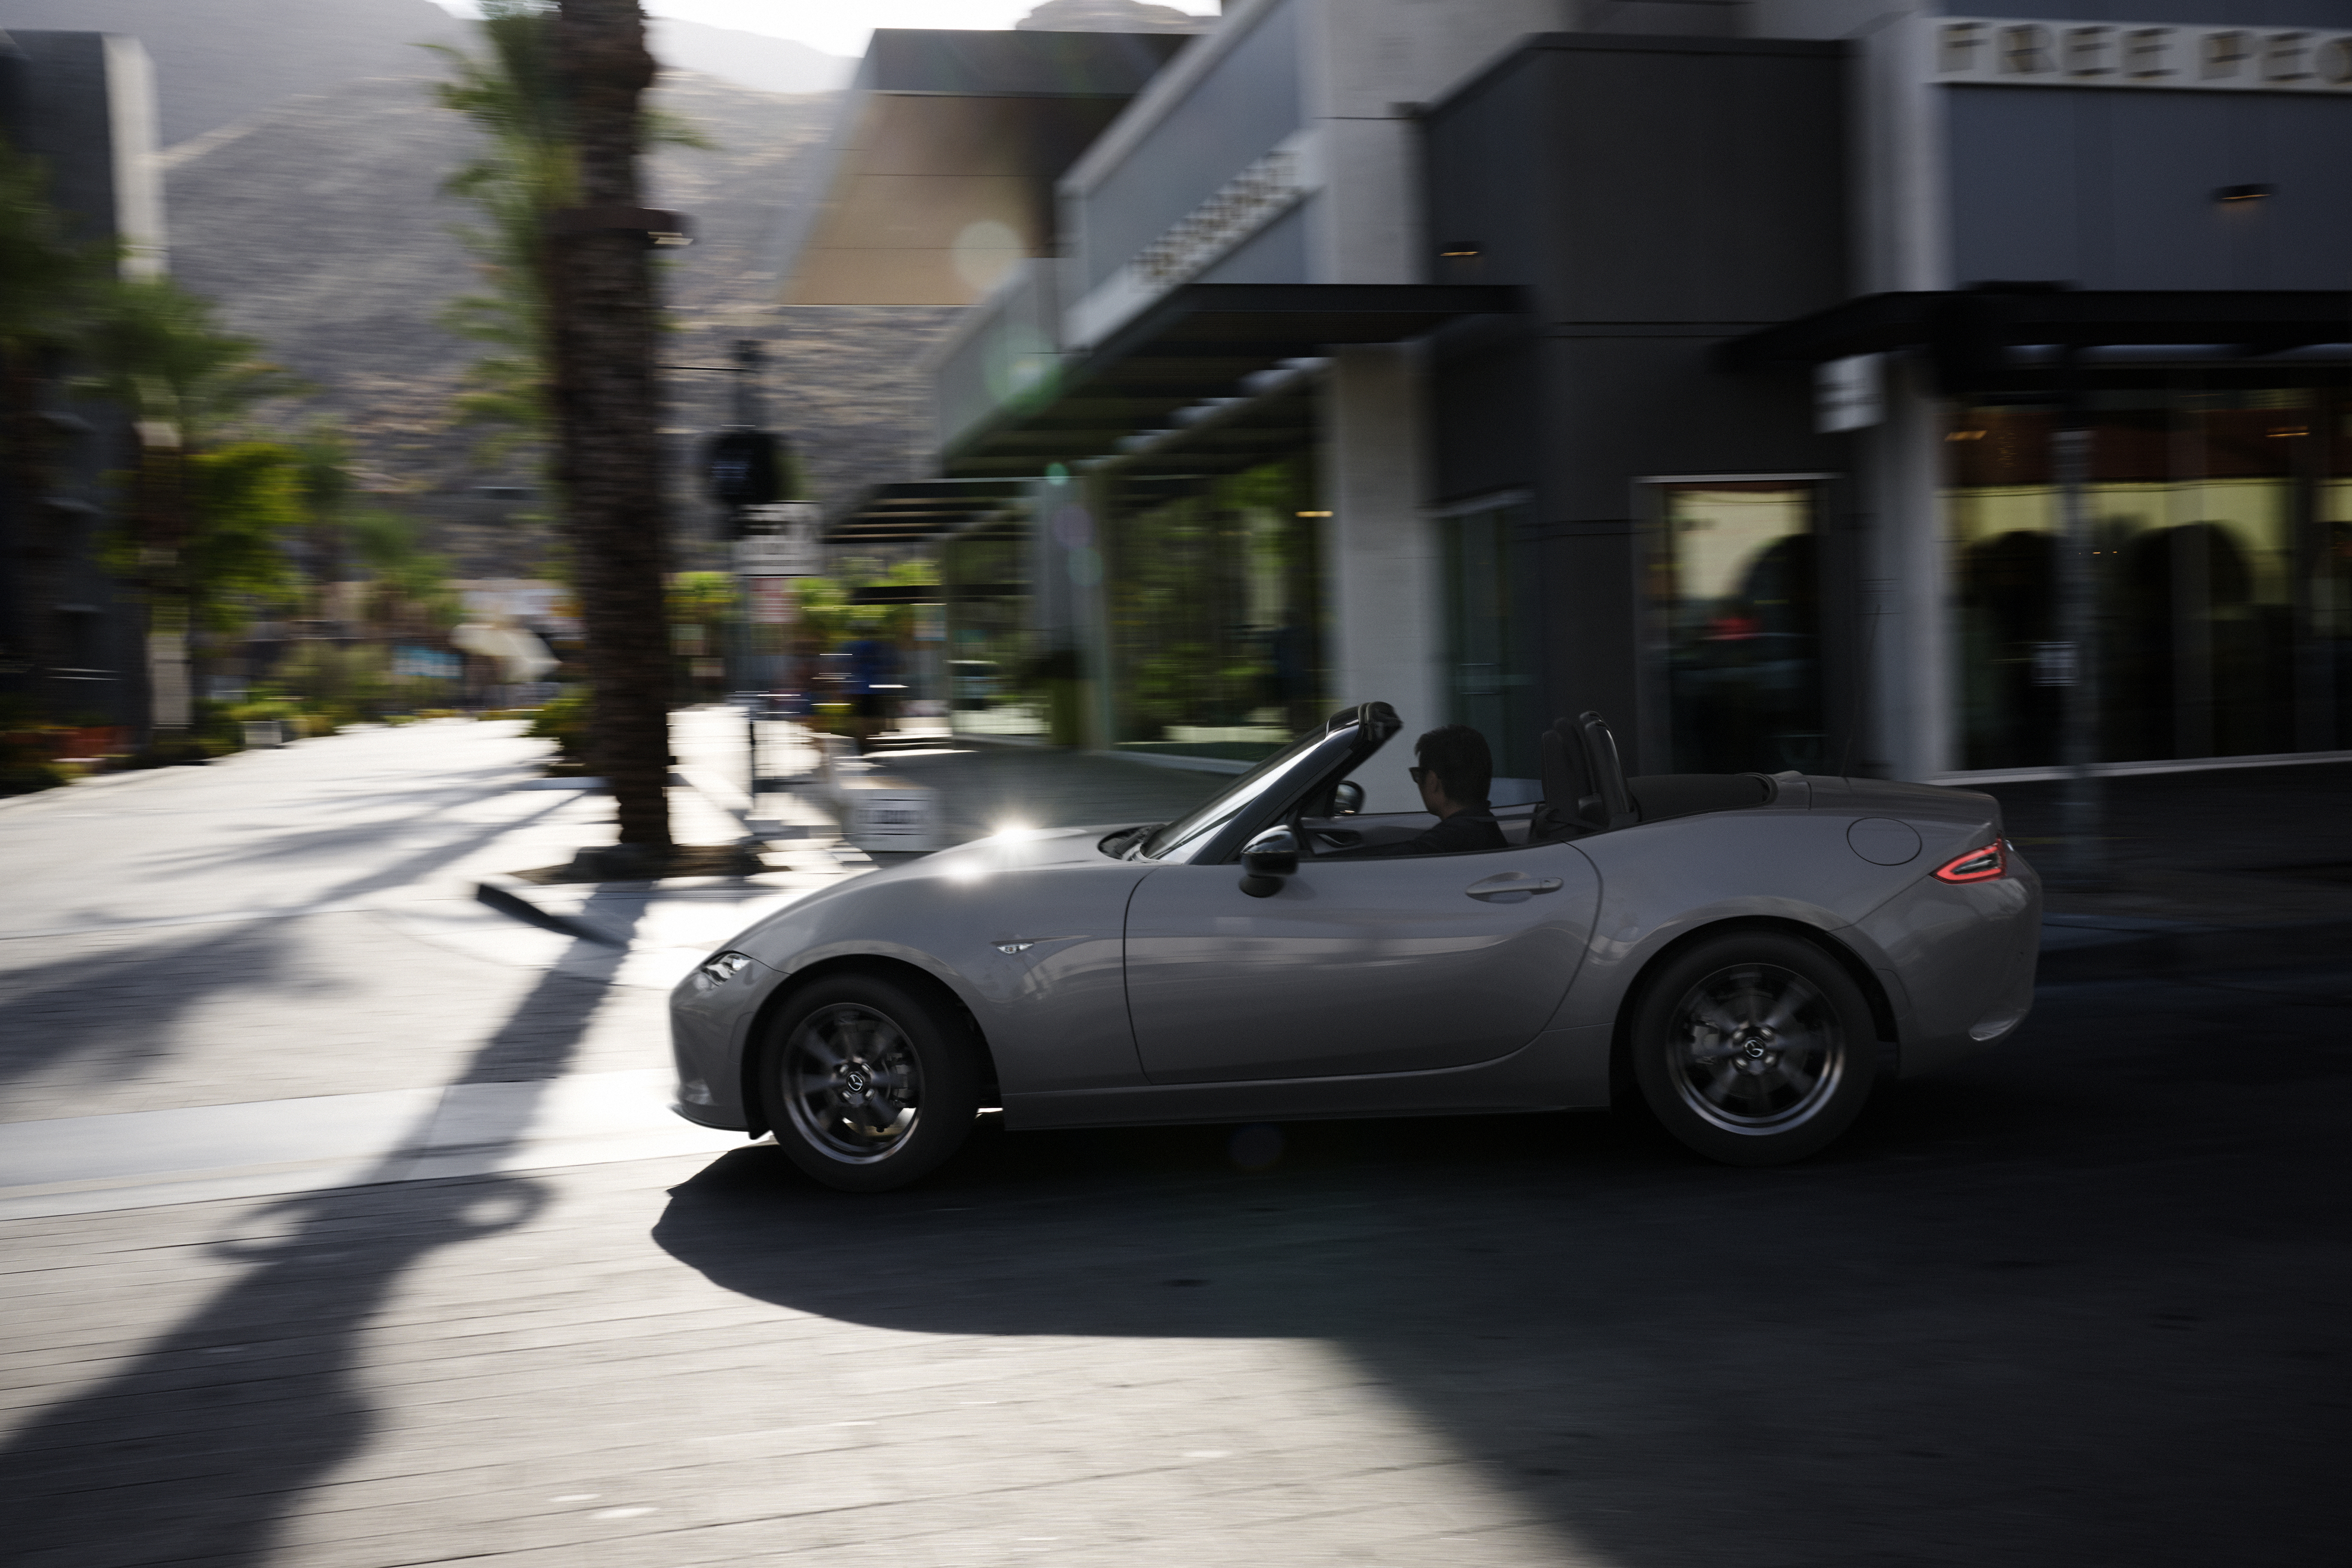 The new Mazda MX-5 will arrive in the UK in March